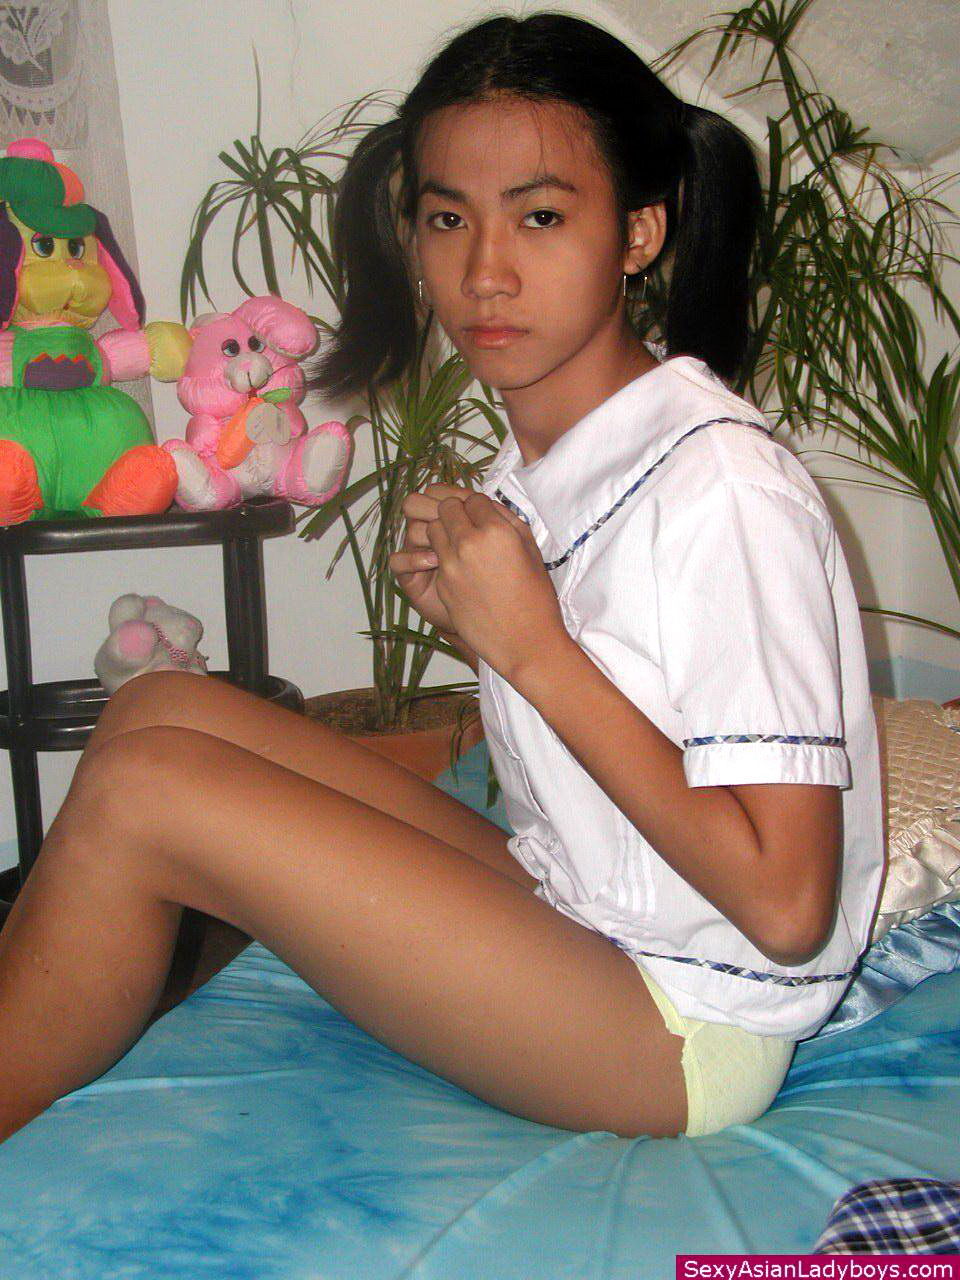 Small Shemale Stripping From Her School Uniform And Spreading